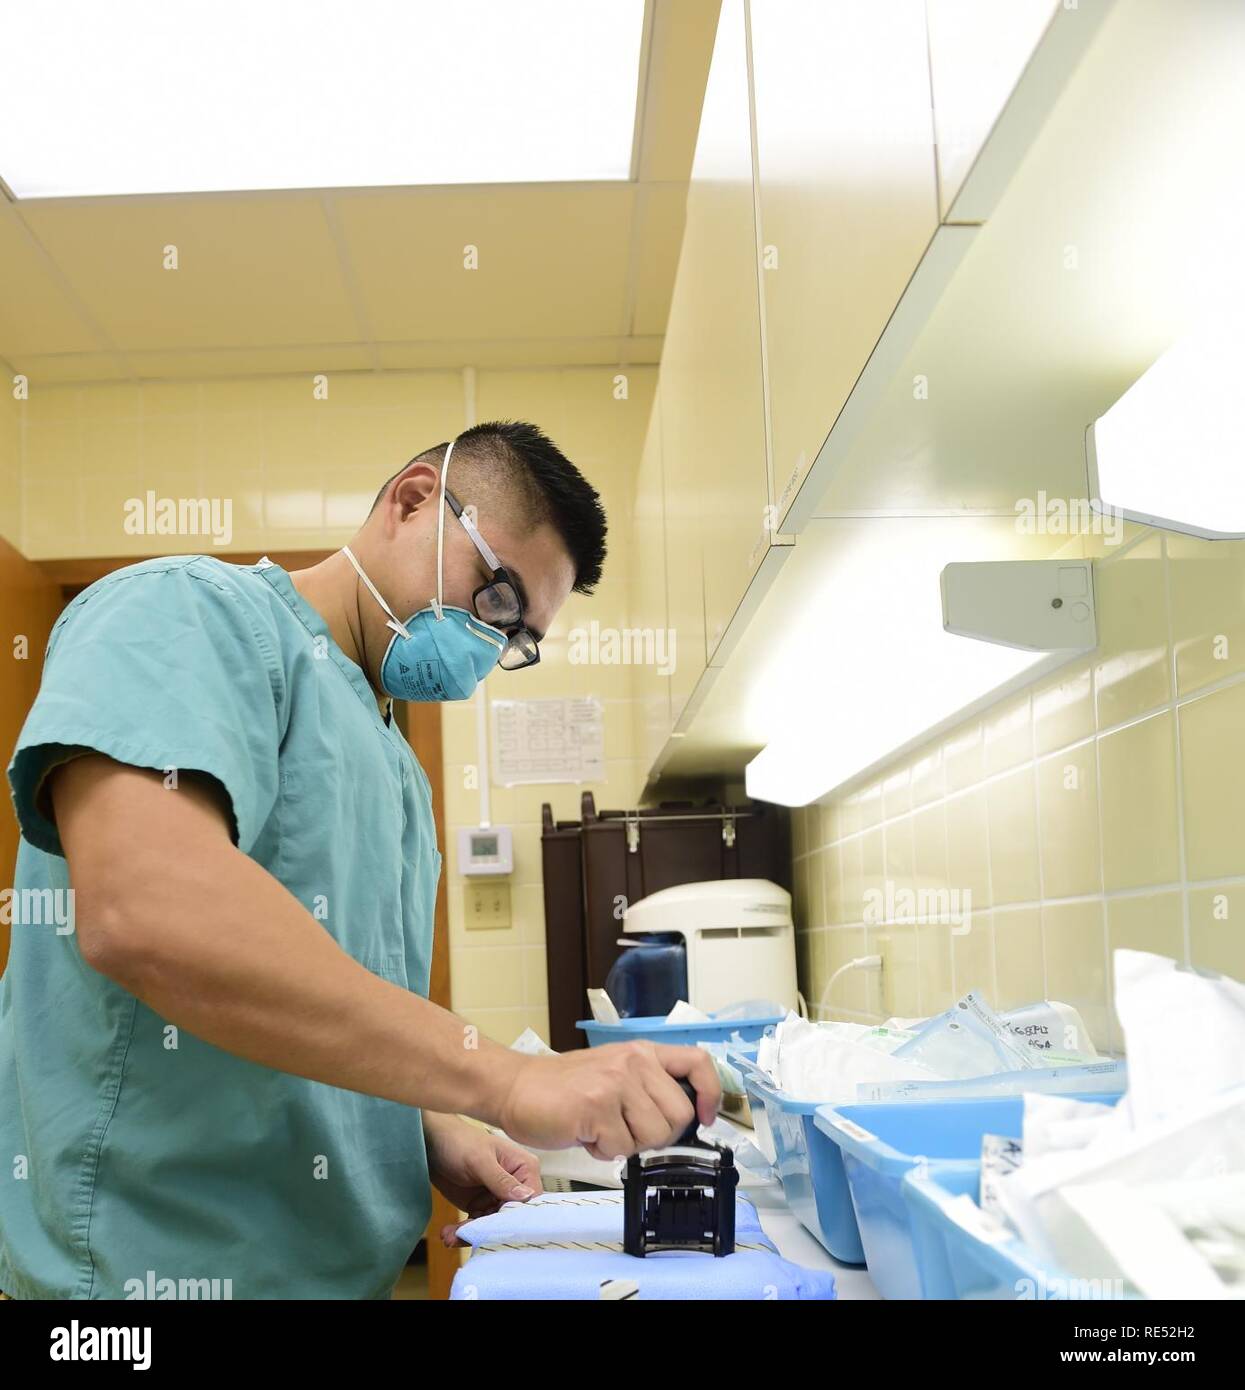 OKINAWA, Japan (Jan. 2, 2019) Hospital Corpsman 3rd Class Julio Domingo, assigned to Naval Mobile Construction Battalion (NMCB) 3, stamps the packaging of sterilized dental tools. NMCB-3 is forward deployed throughout the Indo-Pacific region and United States ready to support major combat operations, theater security, humanitarian assistance and disaster relief operations. Stock Photo